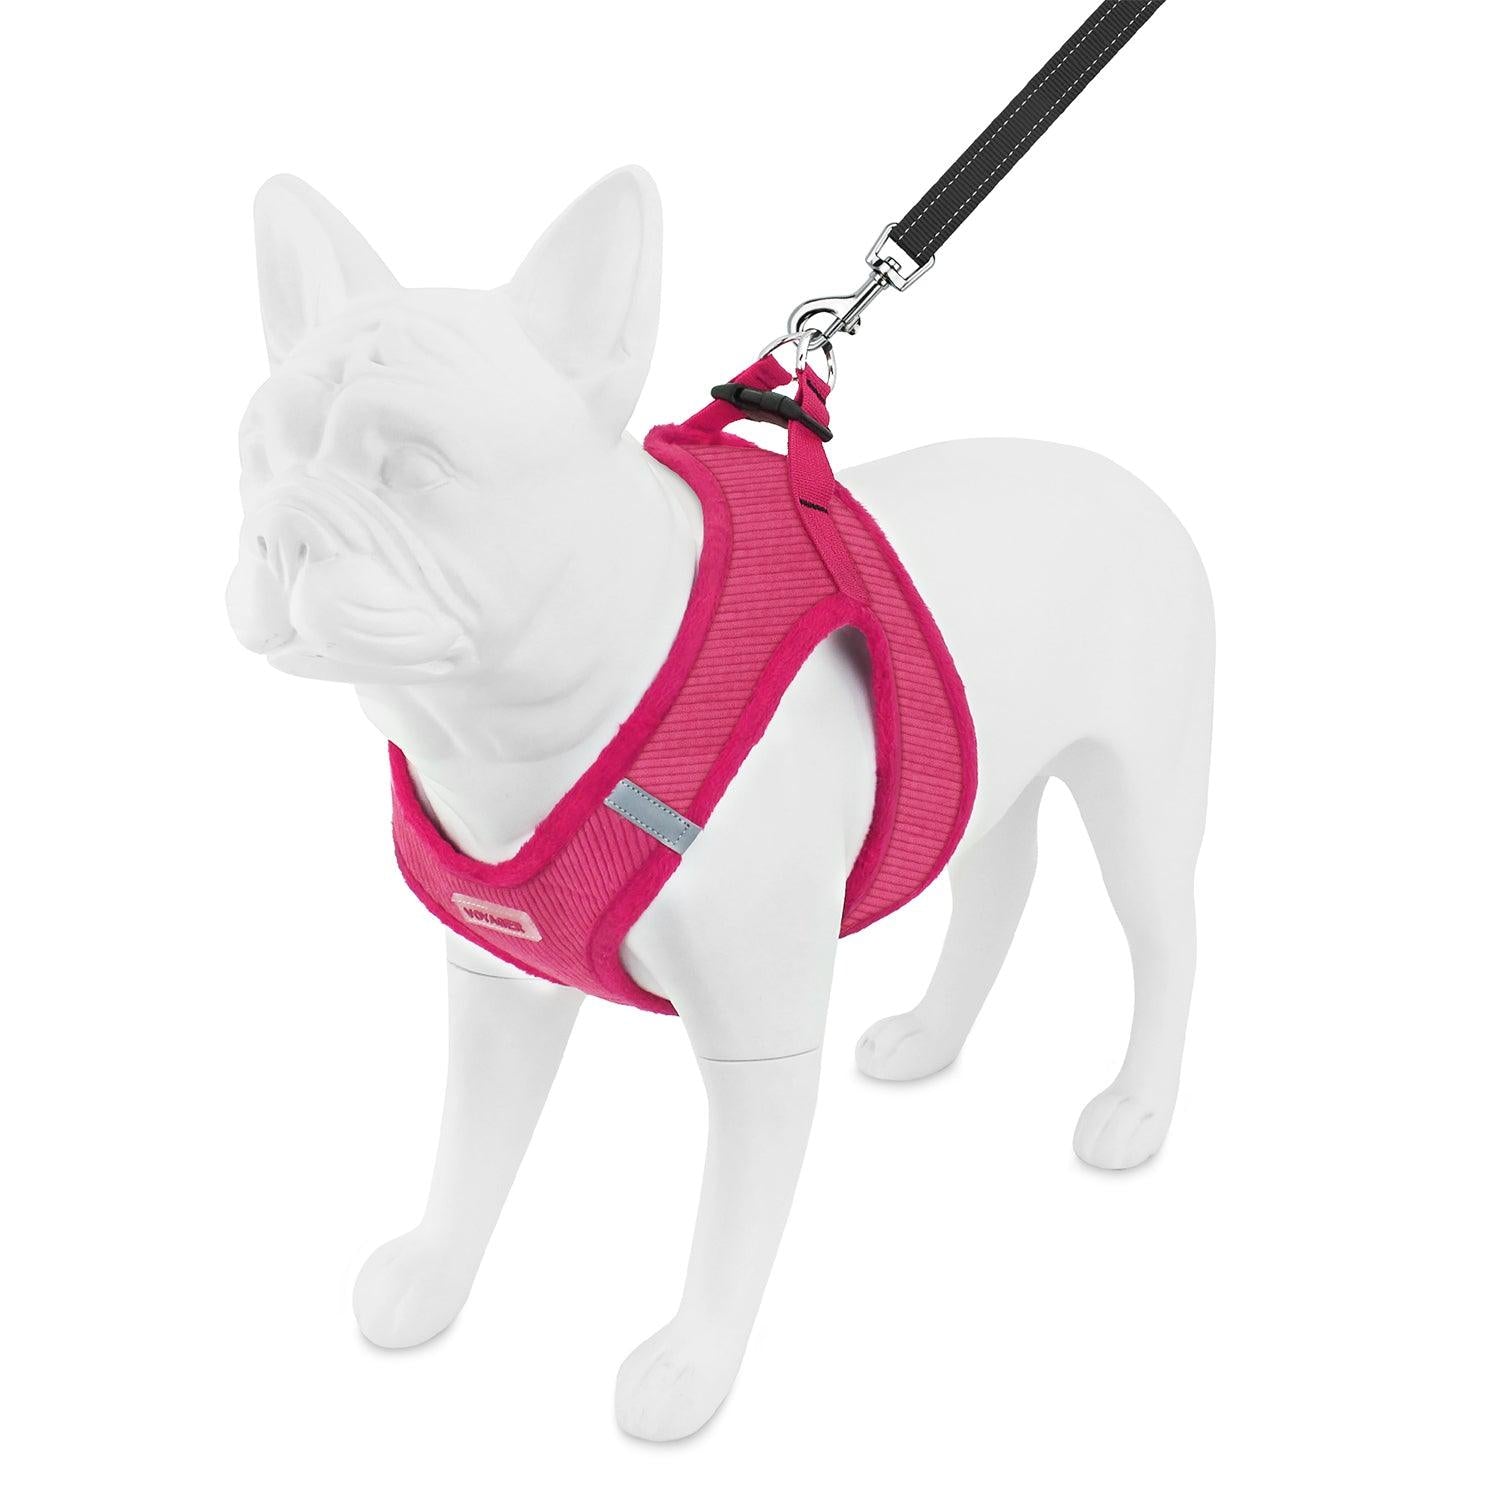 Step-In Plush Harness & Leash Set - VOYAGER Dog Harnesses